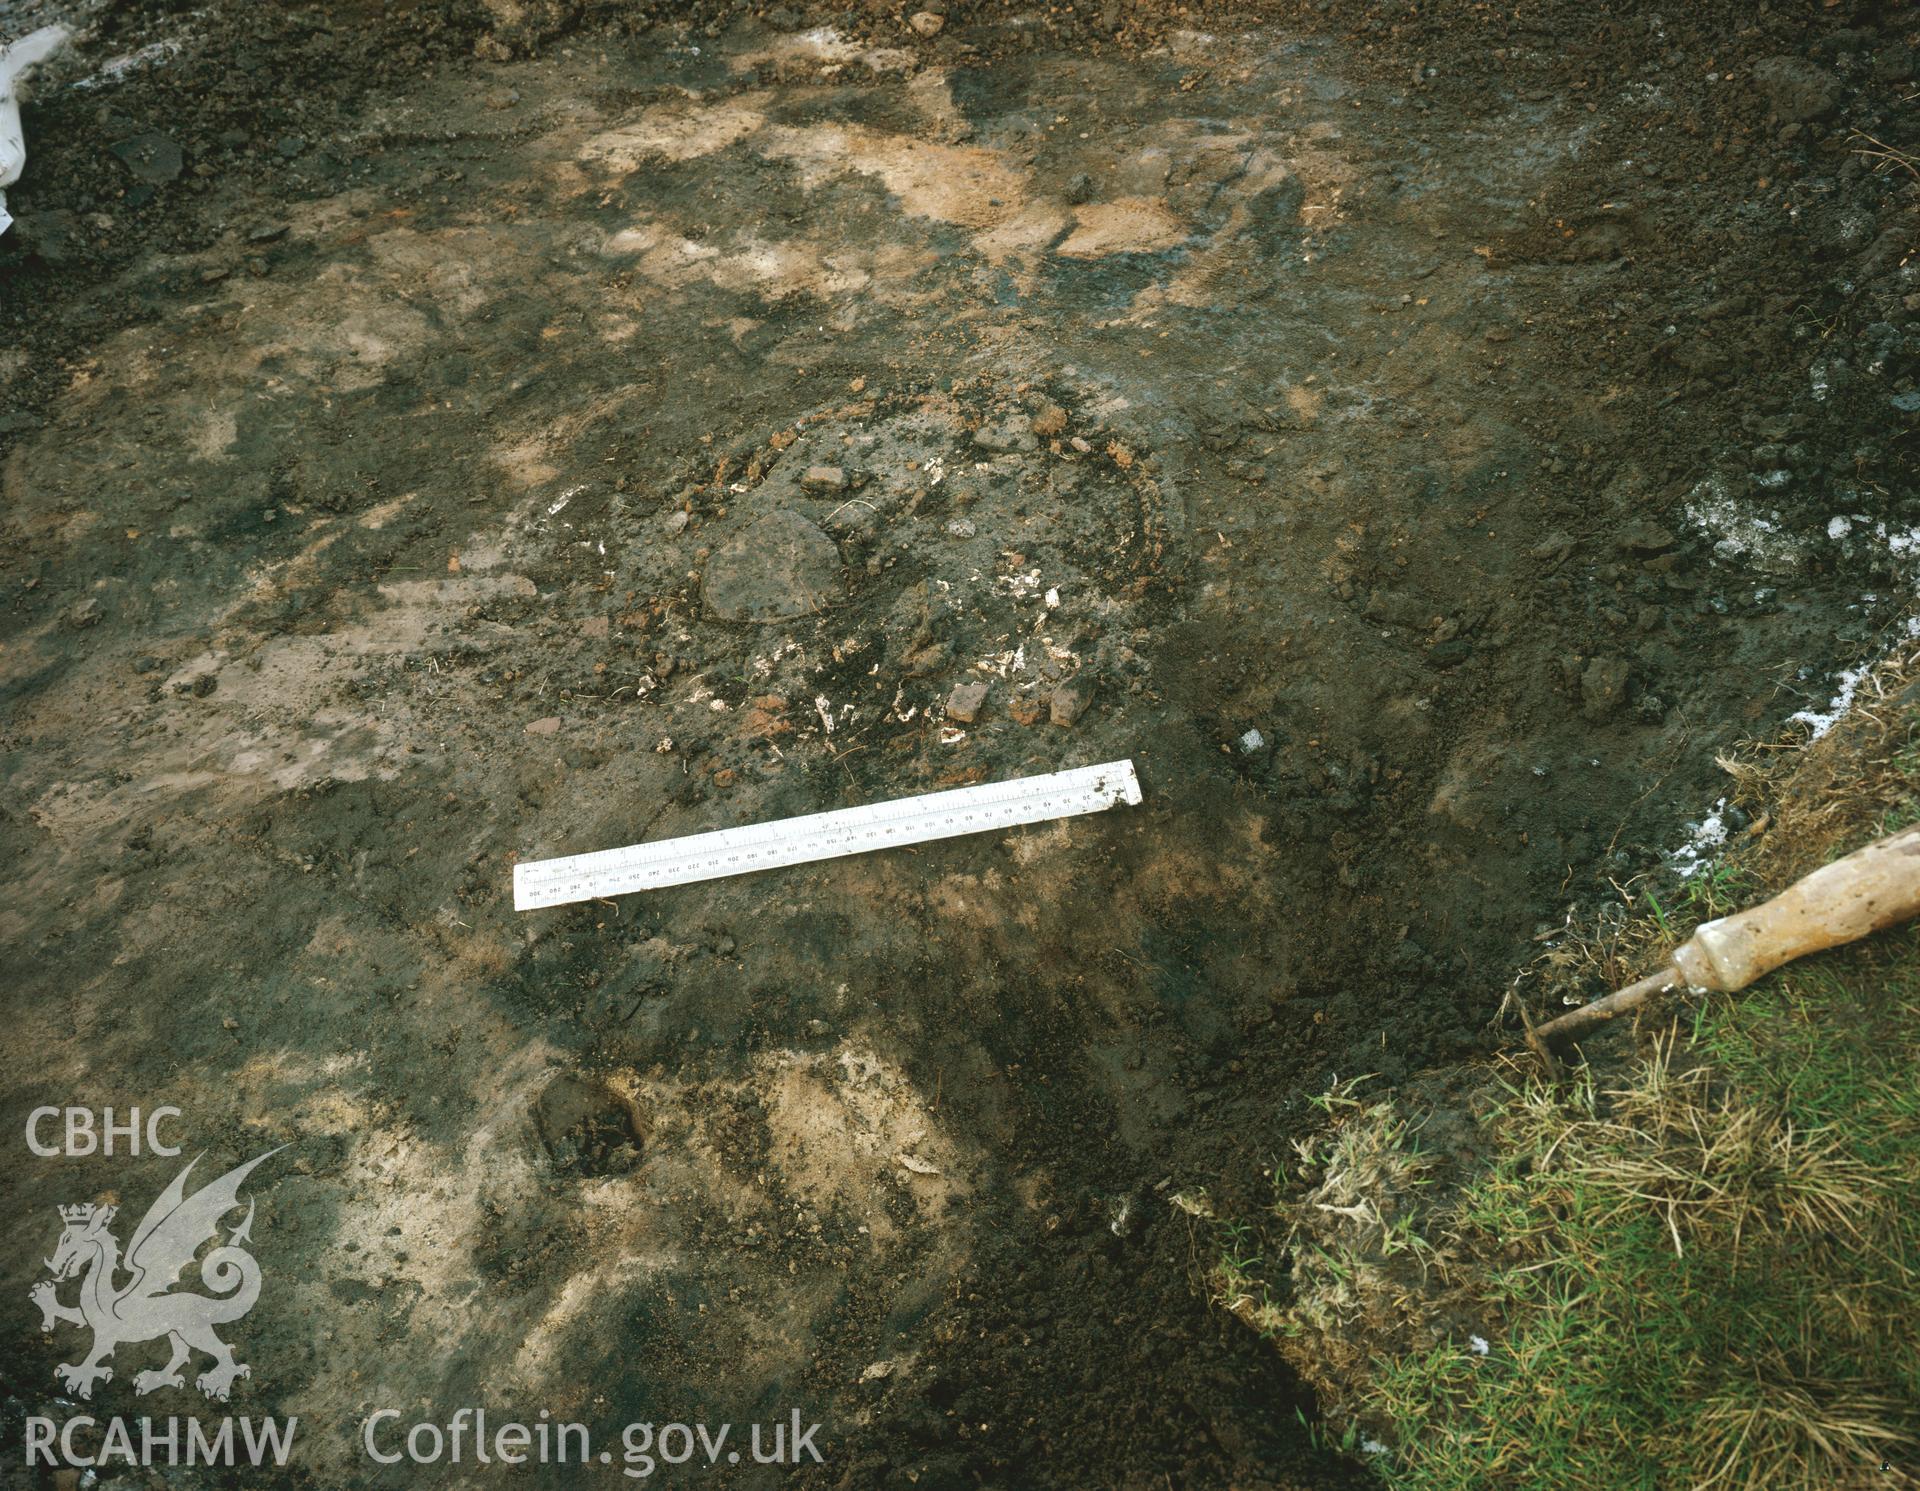 RCAHMW colour transparency showing the urn discovered at Fan y Big burial site, taken by I.N. Wright, 1981.